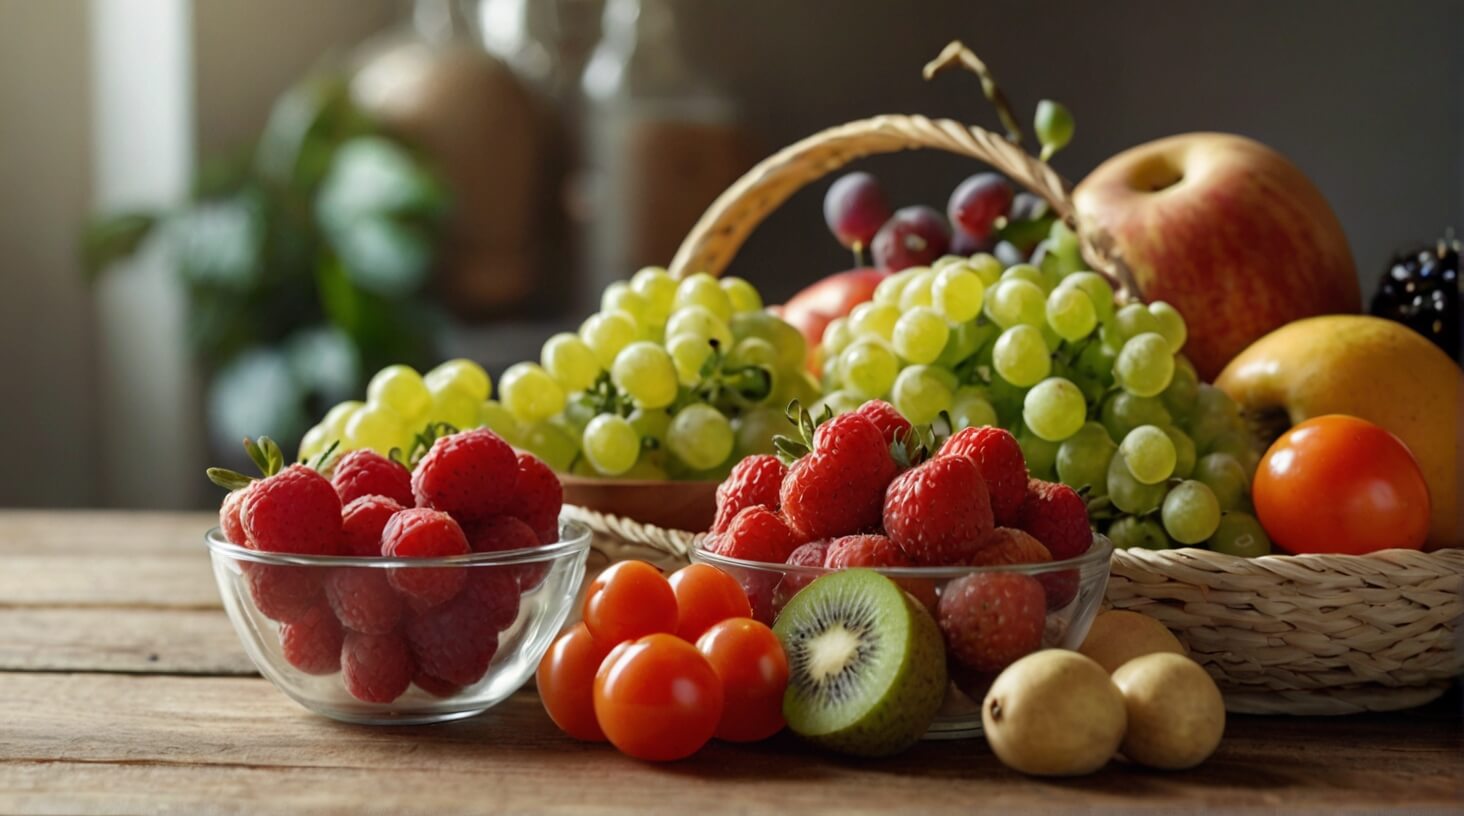 A colorful assortment of fruits and vegetables, emphasizing the importance of prioritizing nutritious foods for optimal health.